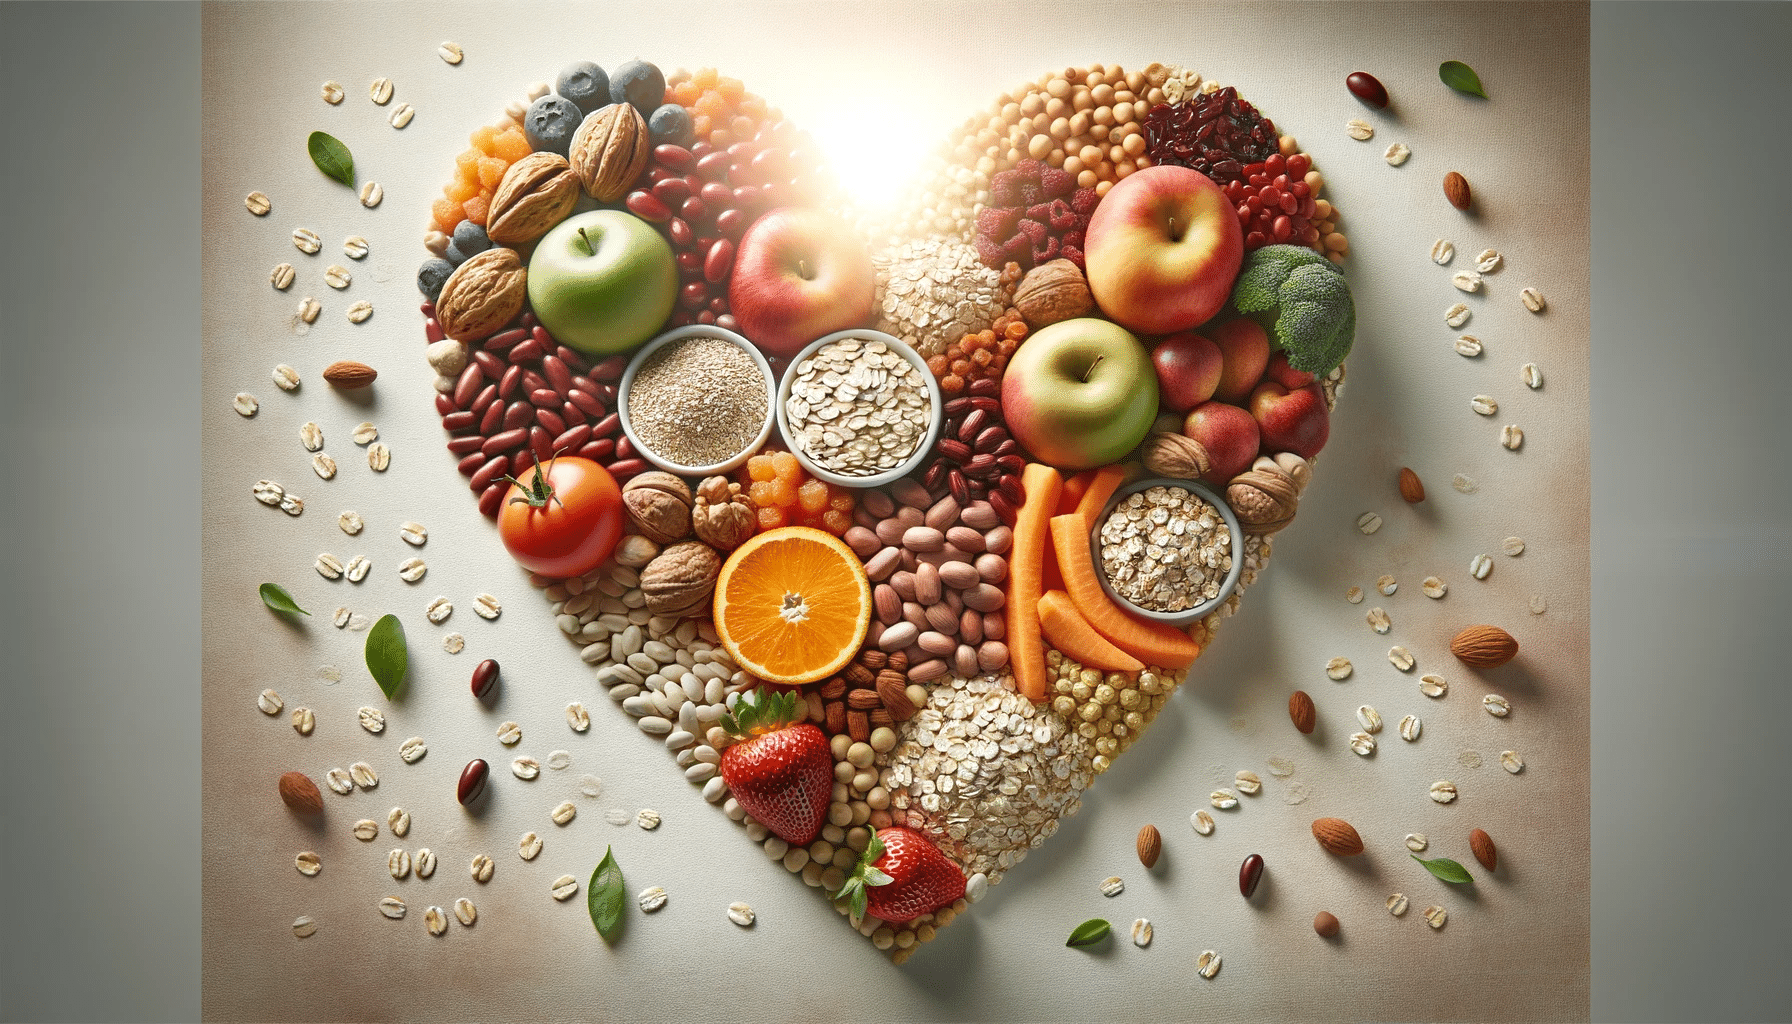 A heart-shaped arrangement made with various types of high-fiber foods like oats, legumes, and fruits. The heart is on a neutral background with sof